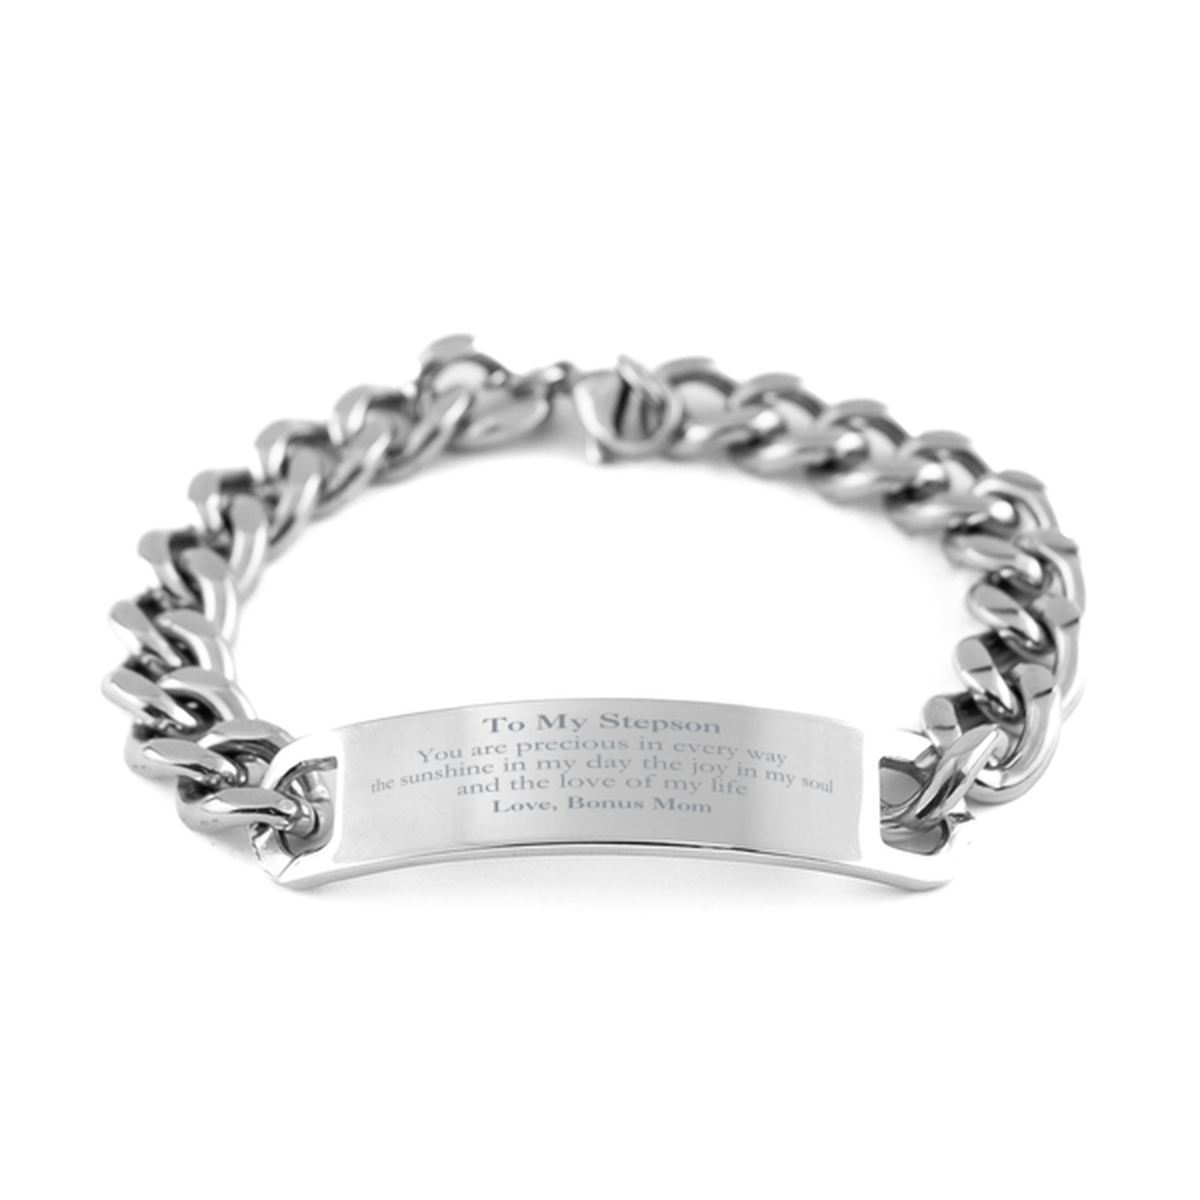 Graduation Gifts for Stepson Cuban Chain Stainless Steel Bracelet Present from Bonus Mom, Christmas Stepson Birthday Gifts Stepson You are precious in every way the sunshine in my day. Love, Bonus Mom